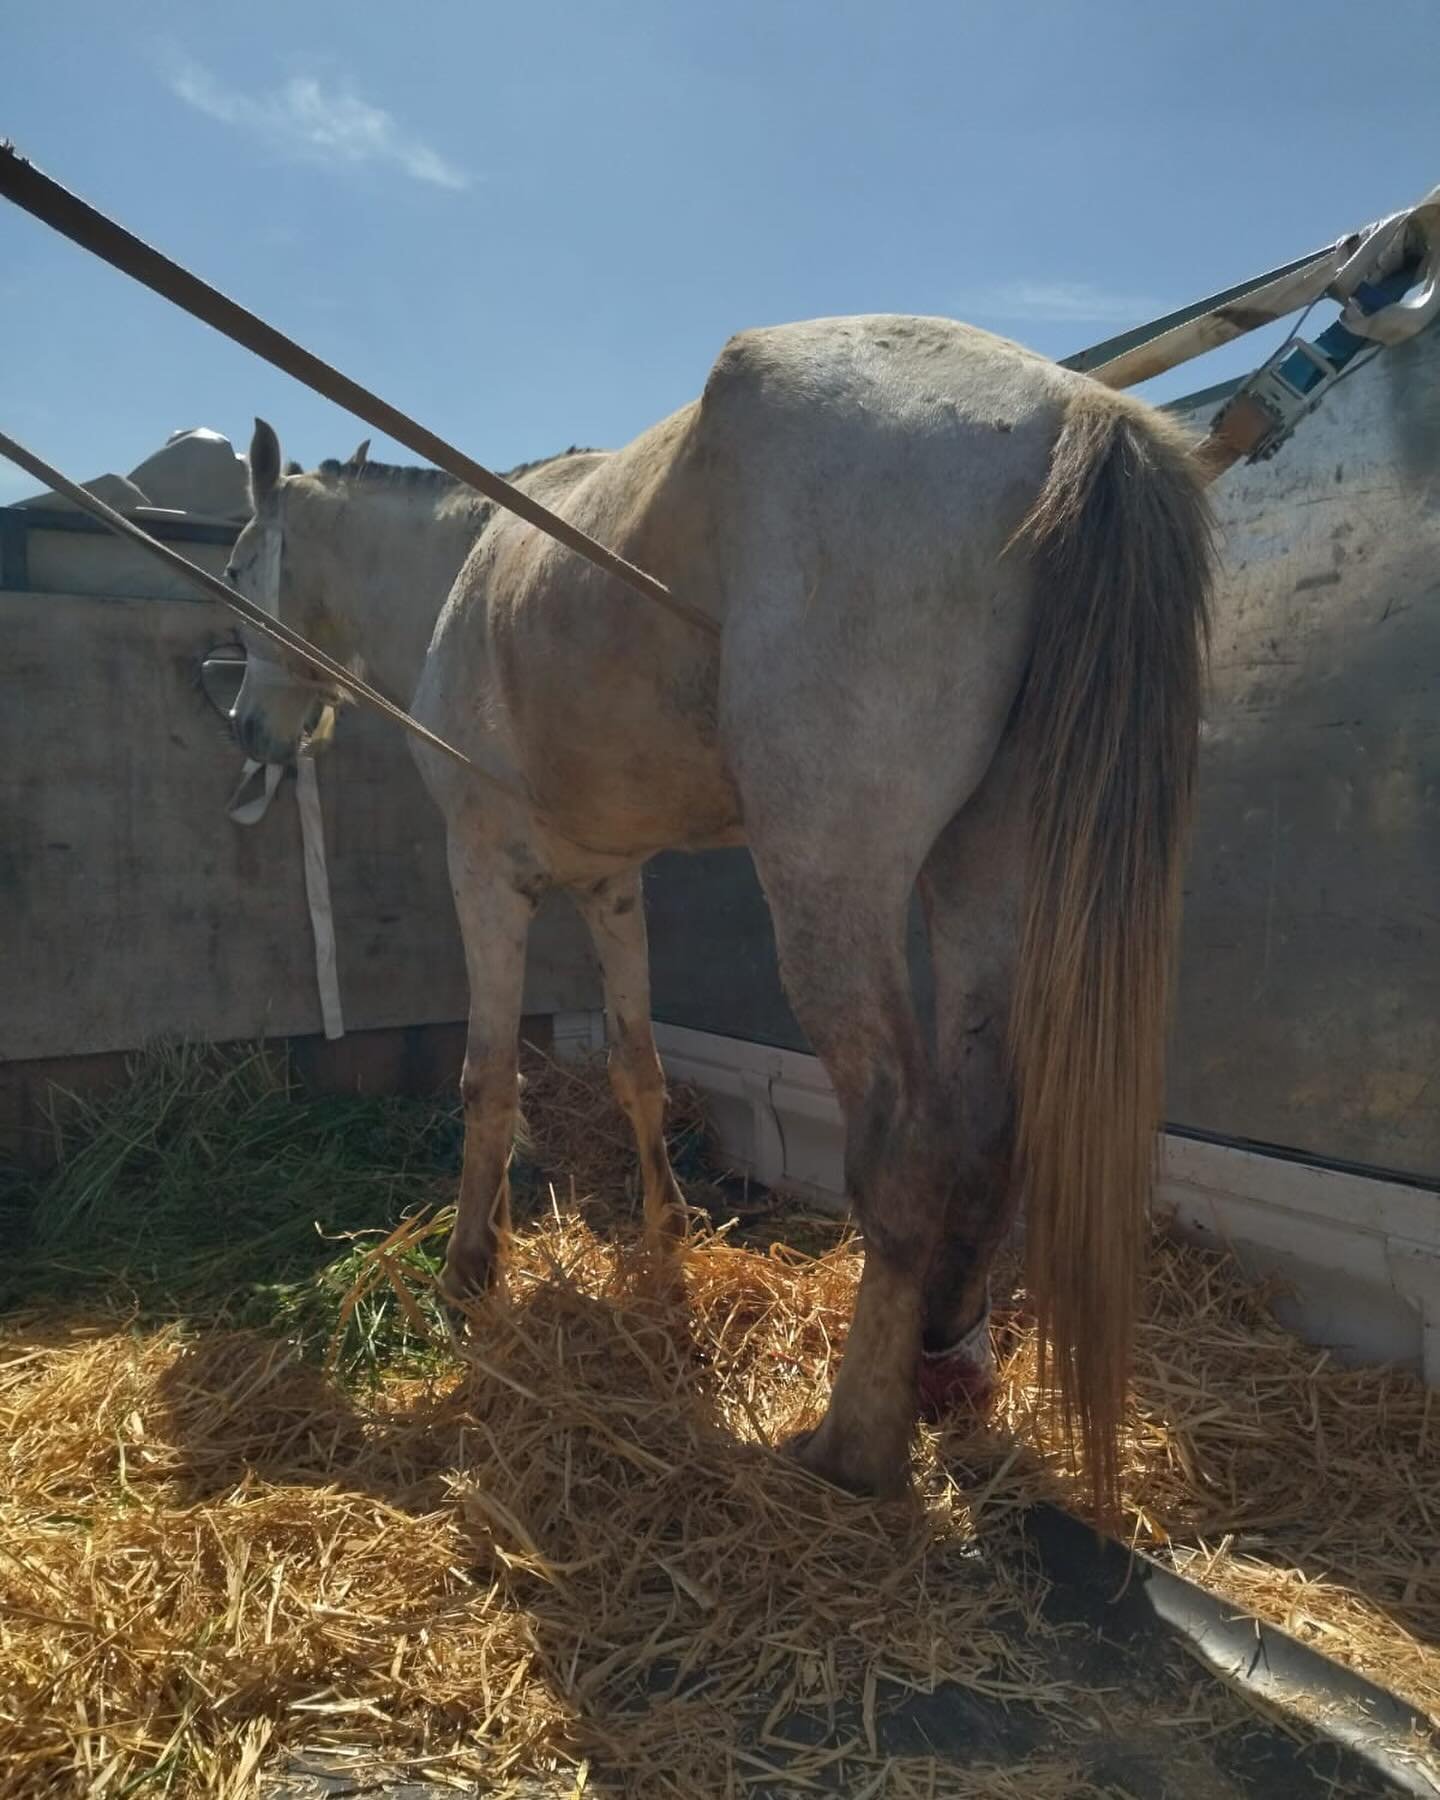 On her way to us from Kenitra. Thank you to everyone who has helped with this rescue. @jarjeermules #horseesofinstagram